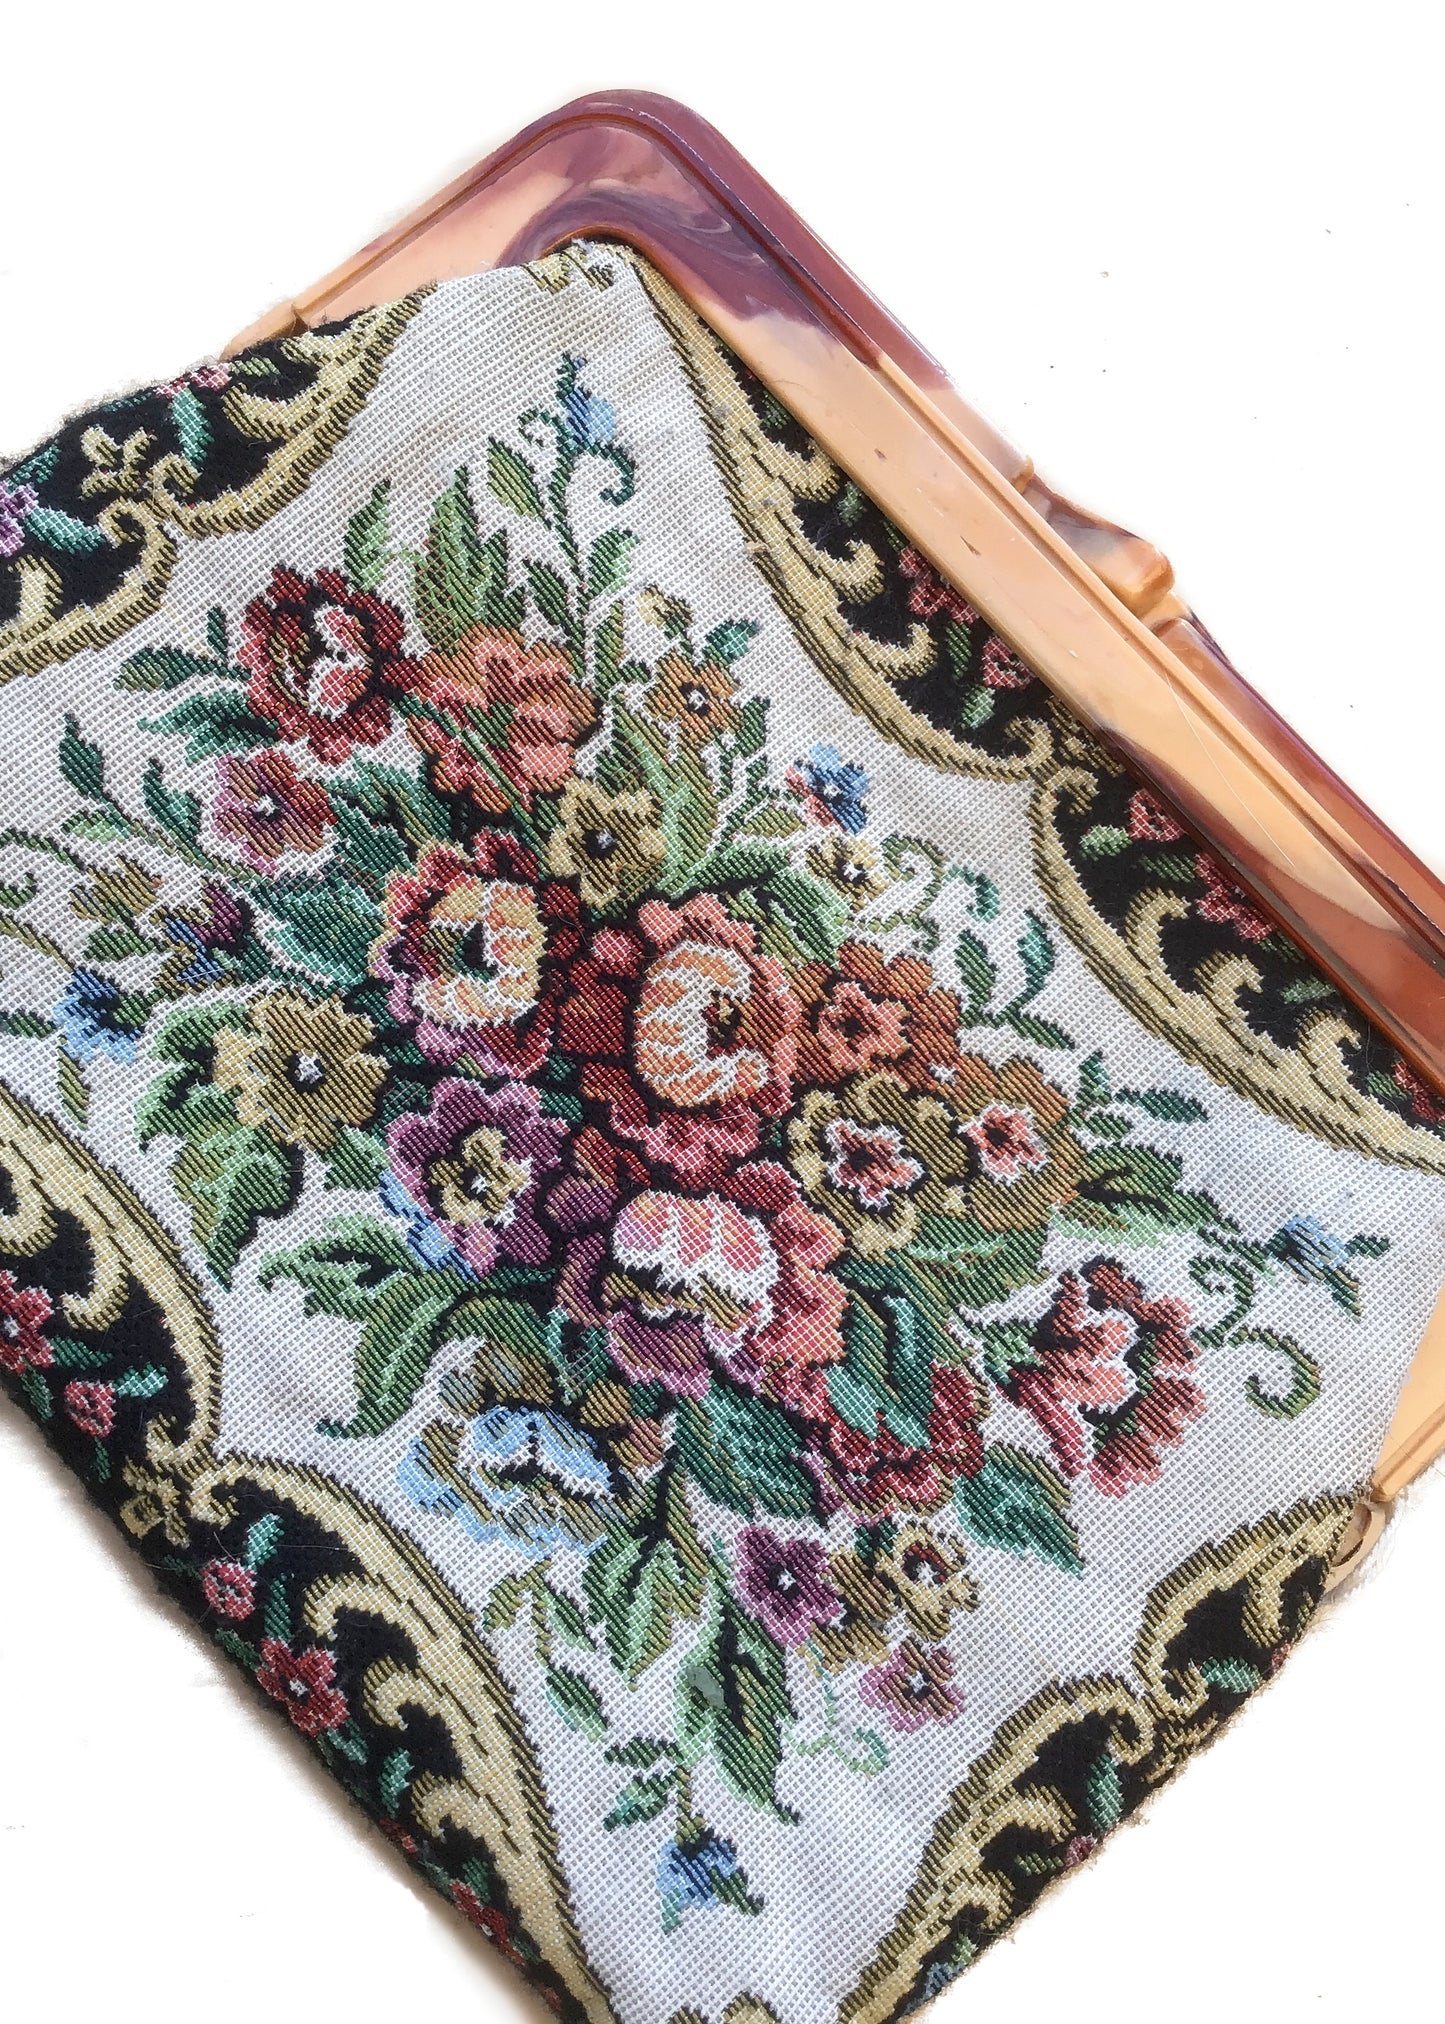 Vintage Tapestry Clutch Bag With Celluloid Frame Clasp • Repaired